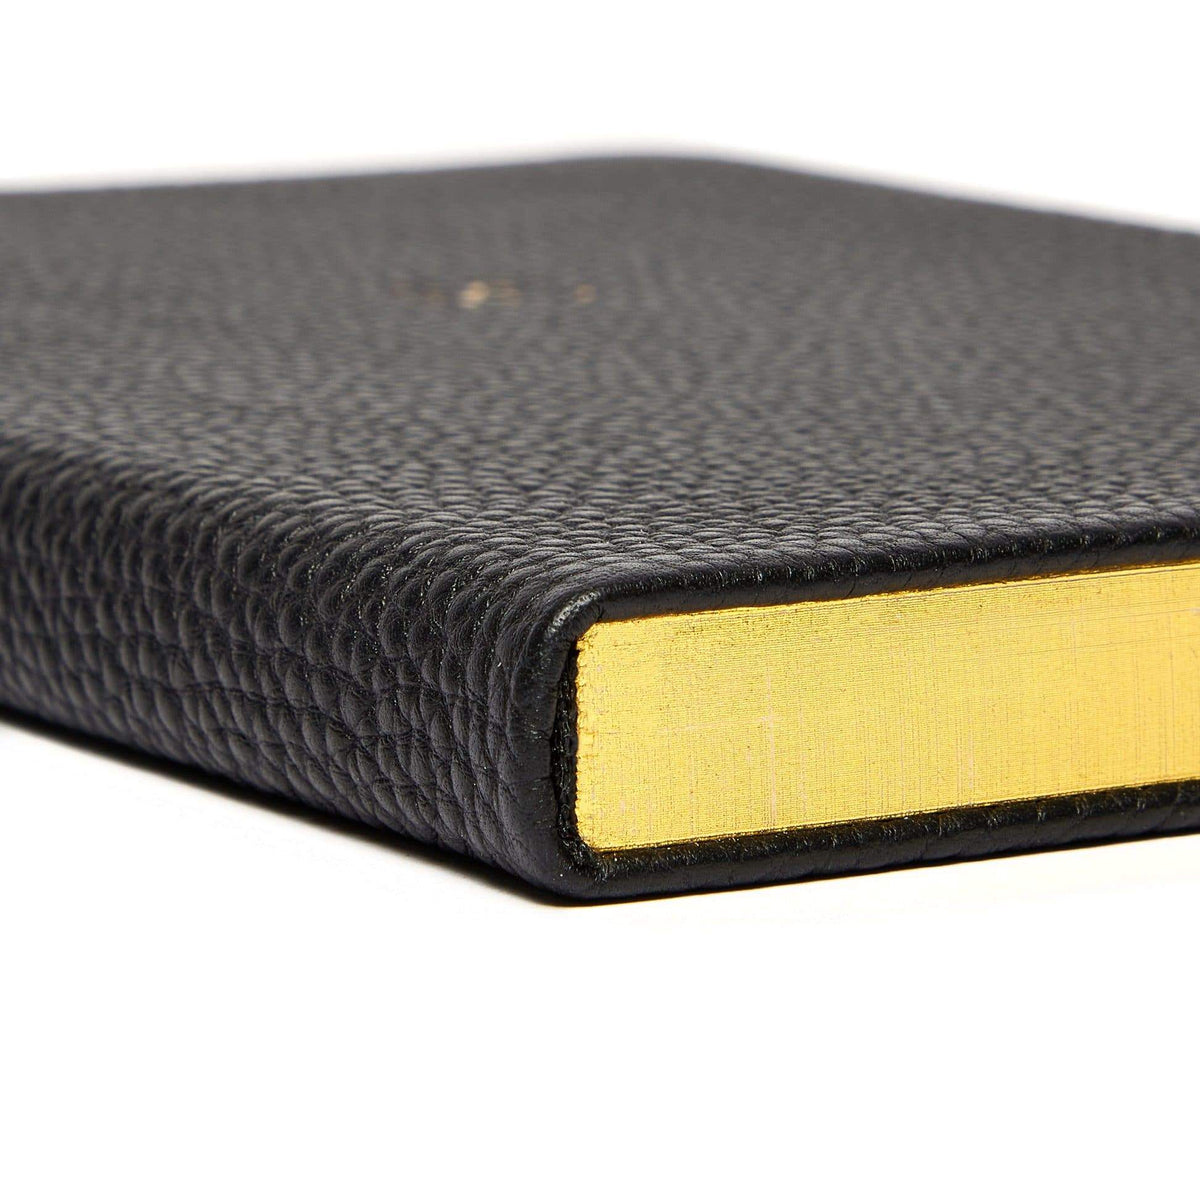 007 Personalised Pebble-grain Leather Notebook (A4) STATIONERY Plinth 